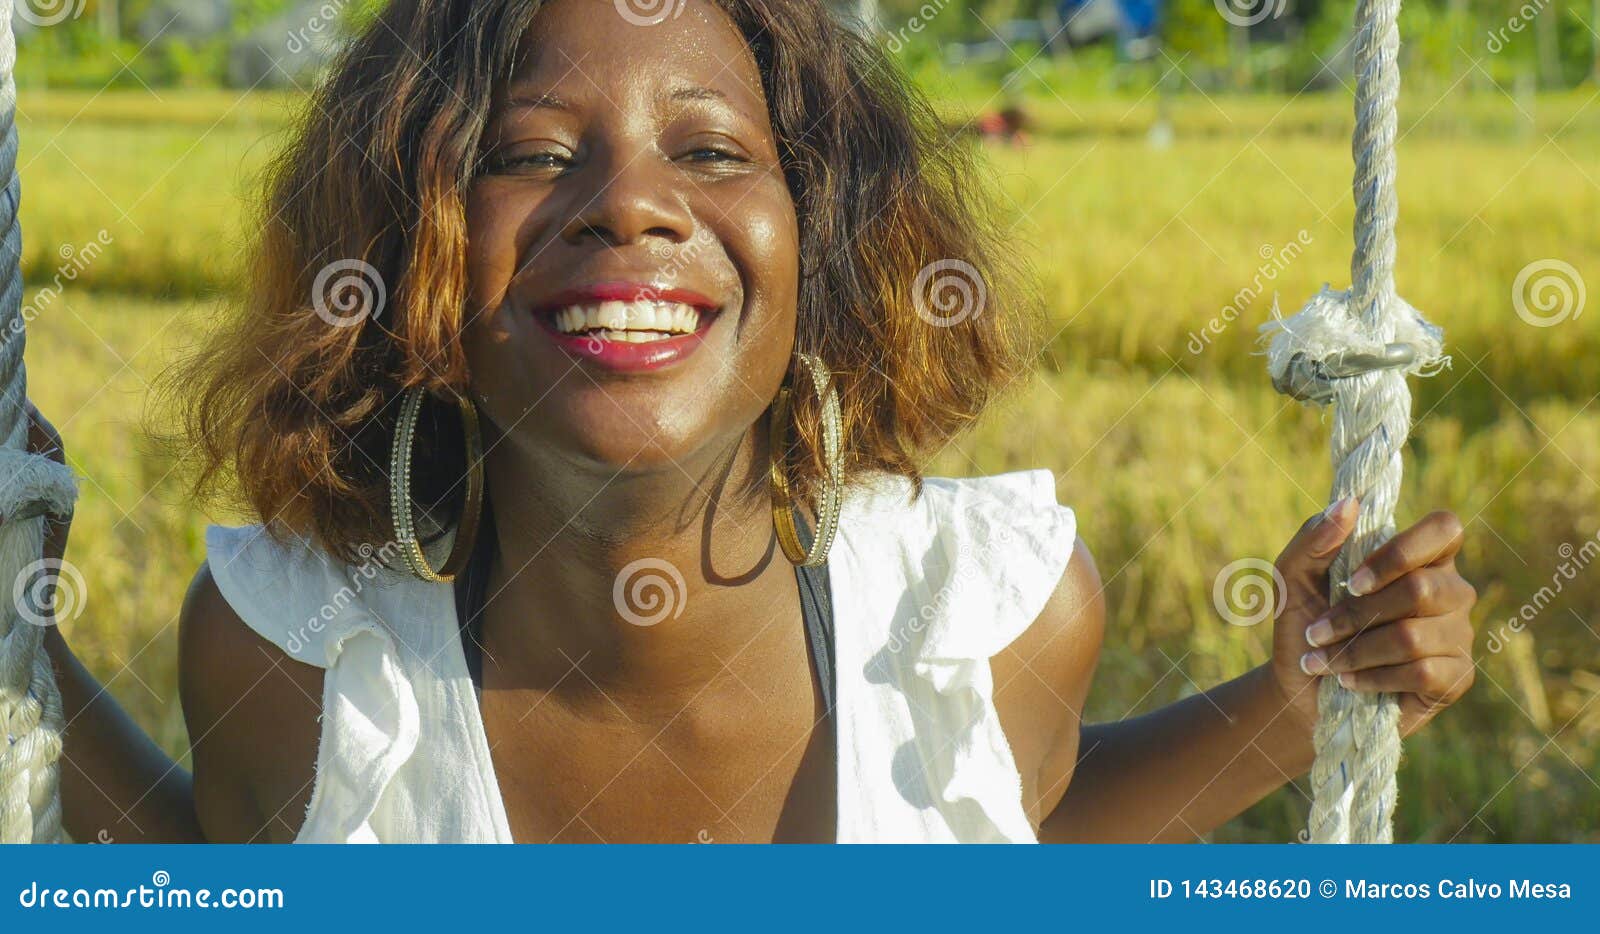 young happy and beautiful black african american woman in summer dress playing outdoors on swing smiling cheerful and relaxed